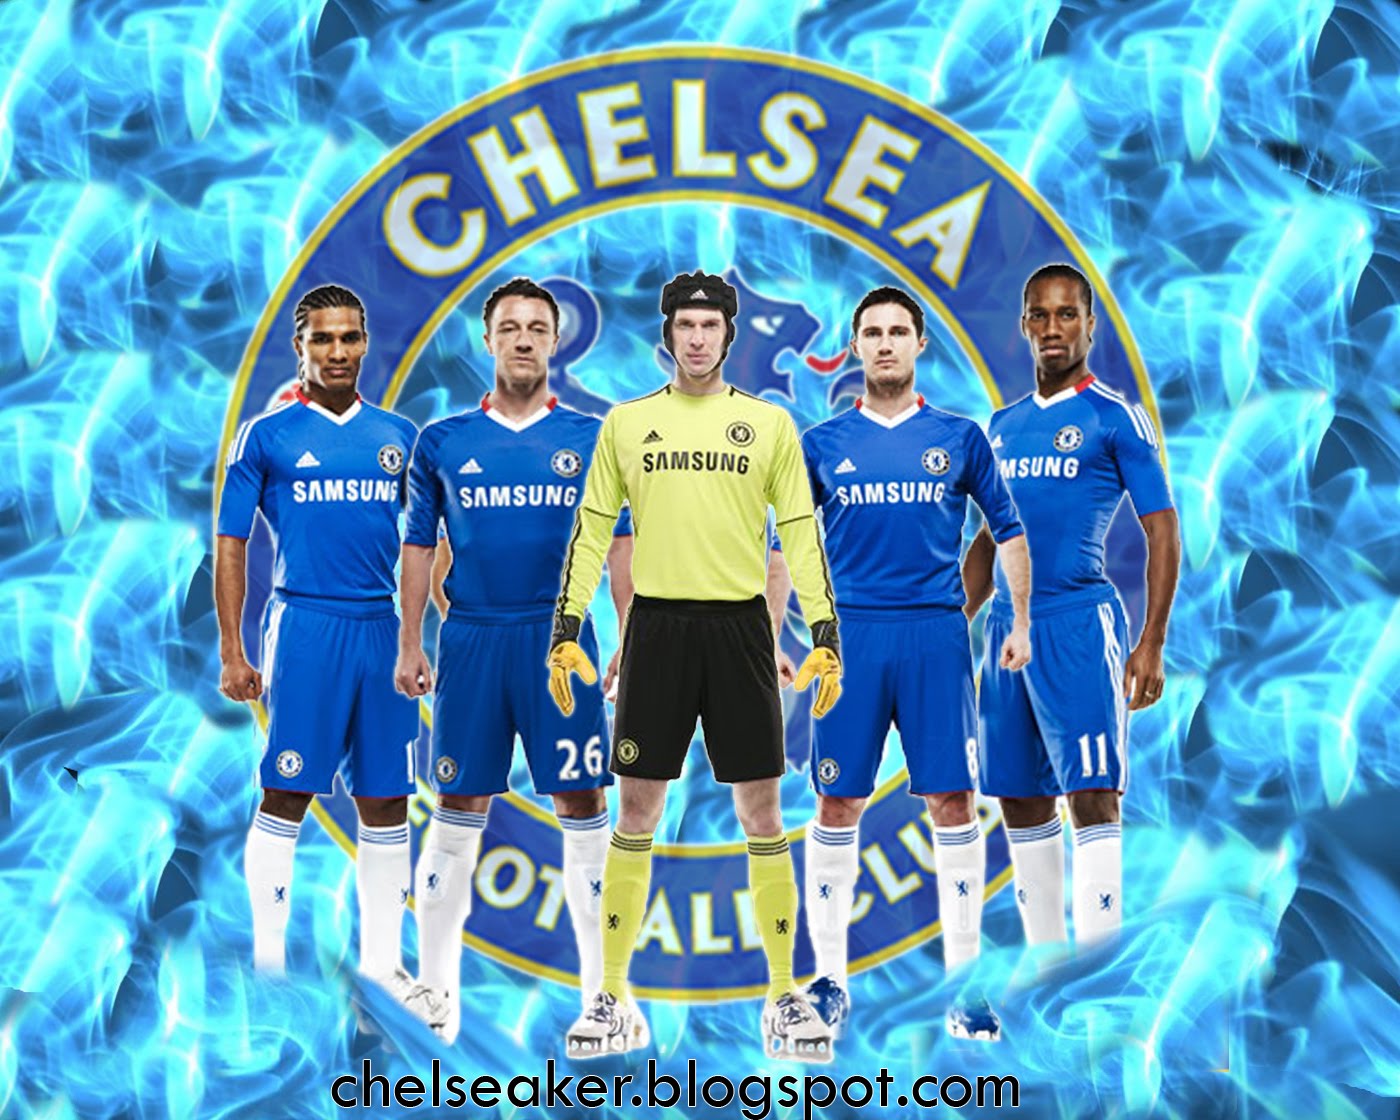 Real Madrid And Barcelona 2012 Chelsea Fc Team Wallpaper